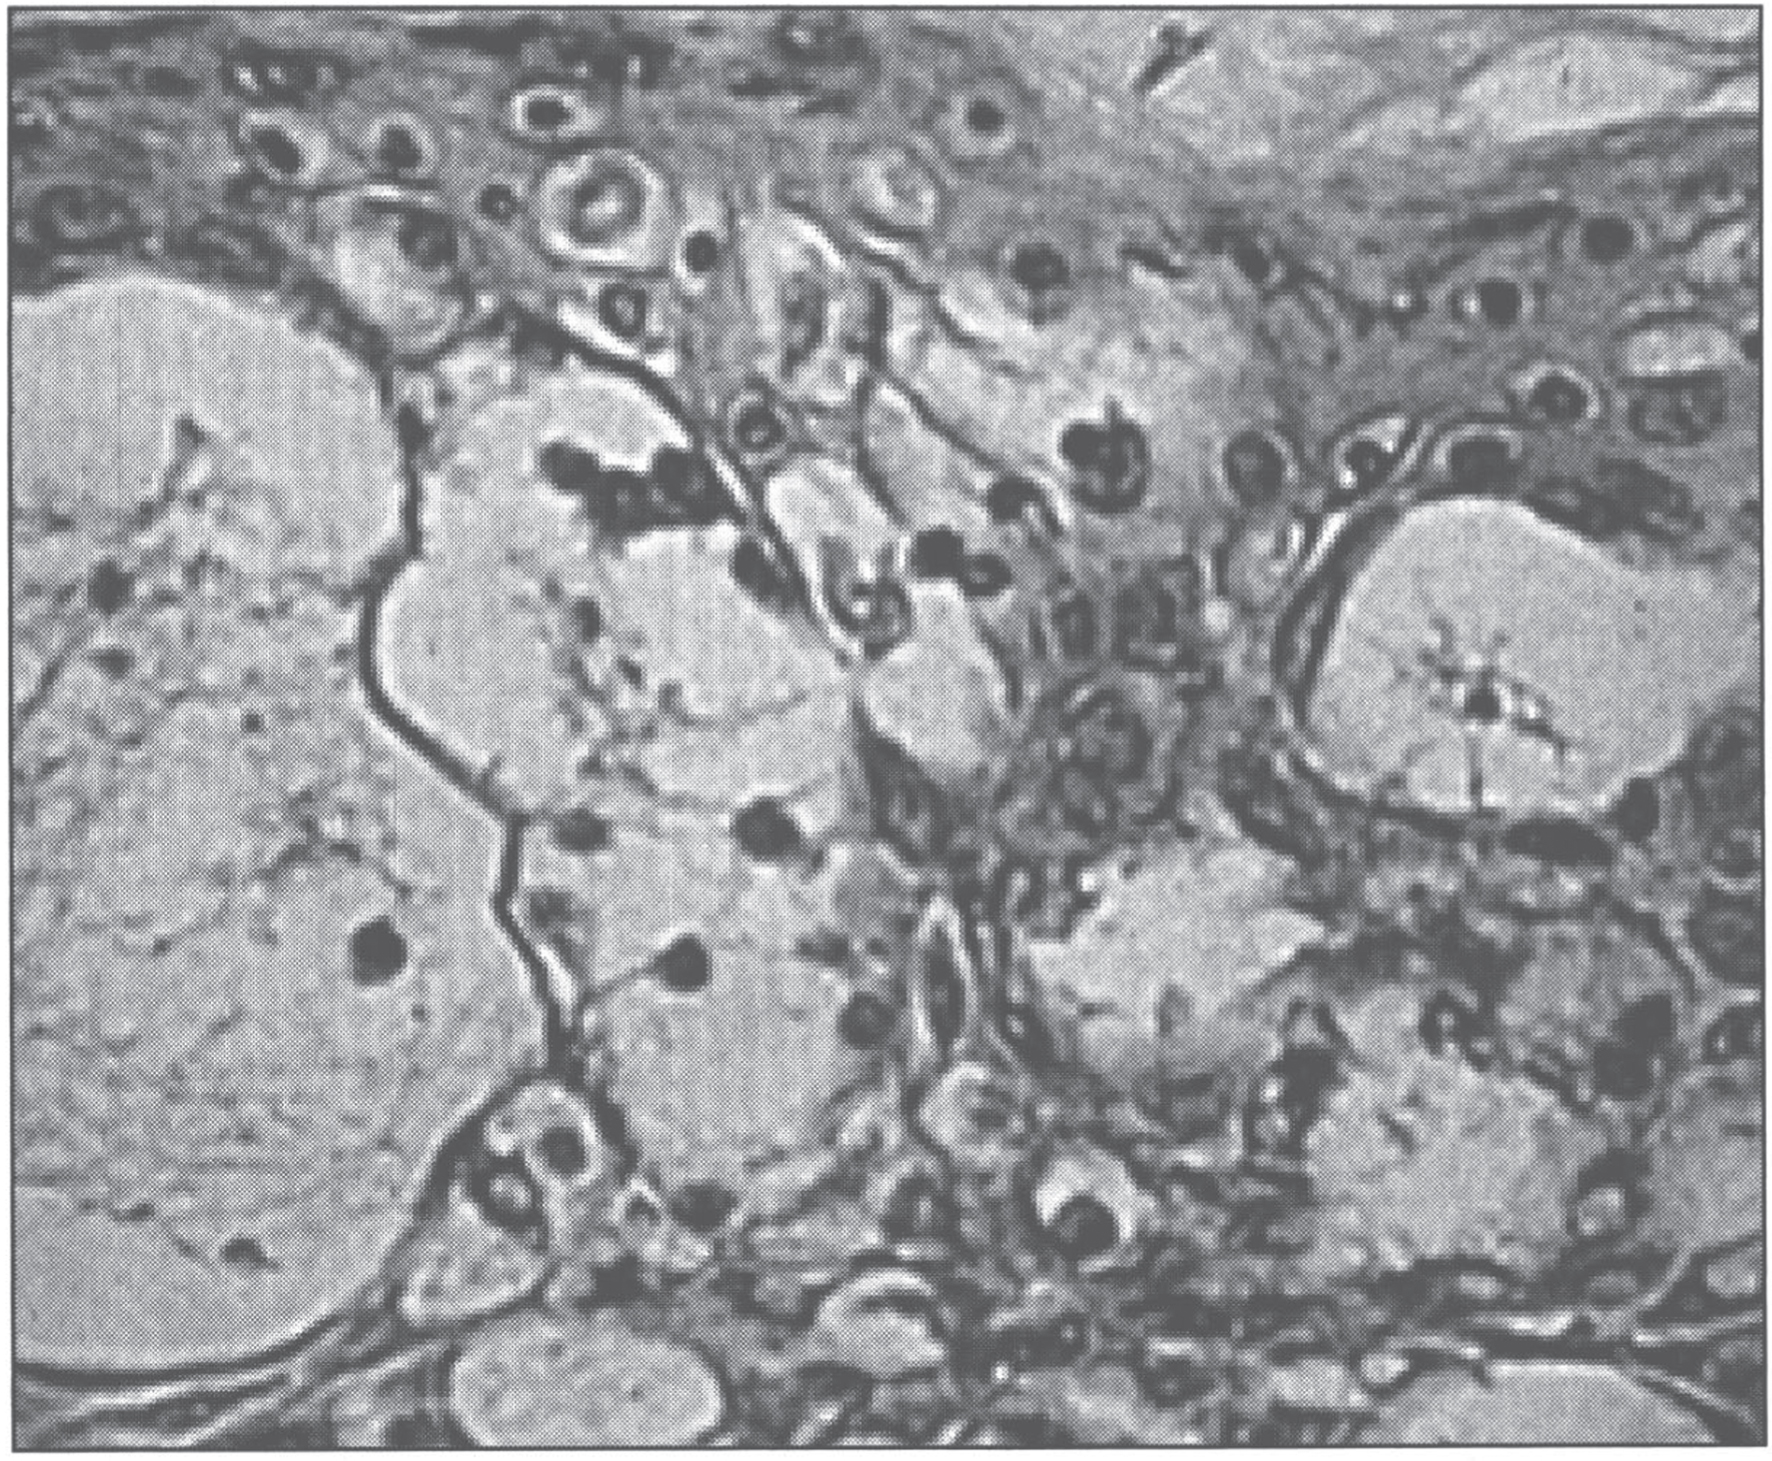 Microscopic appearance of skin in acrodermatitis enteropathica showing epidermal vacuolar degeneration.